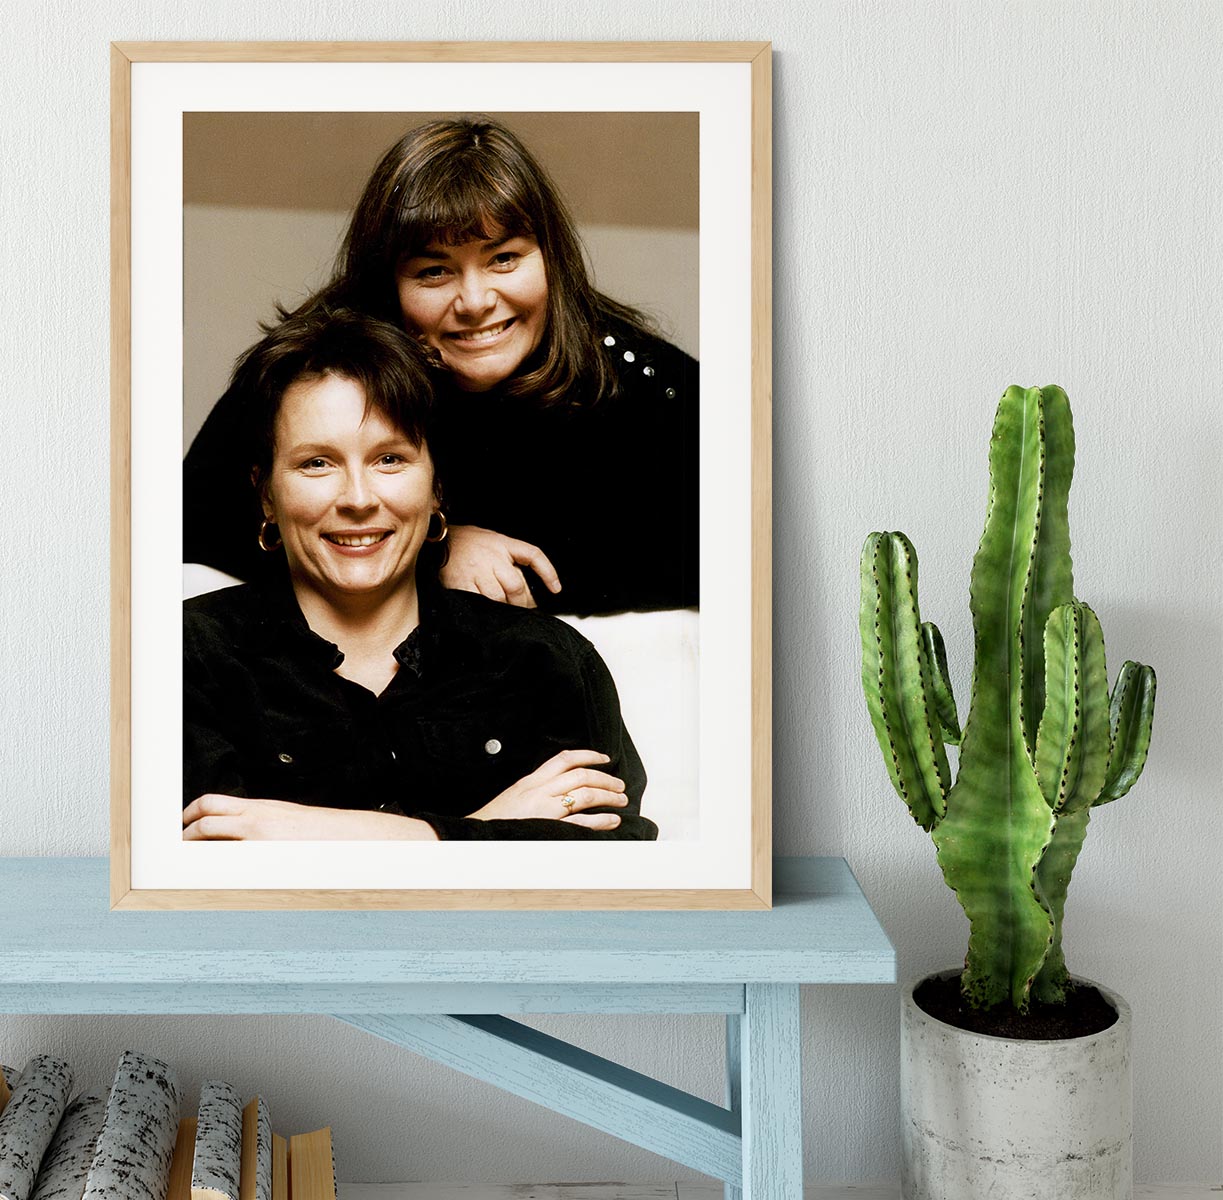 French and Saunders Framed Print - Canvas Art Rocks - 3